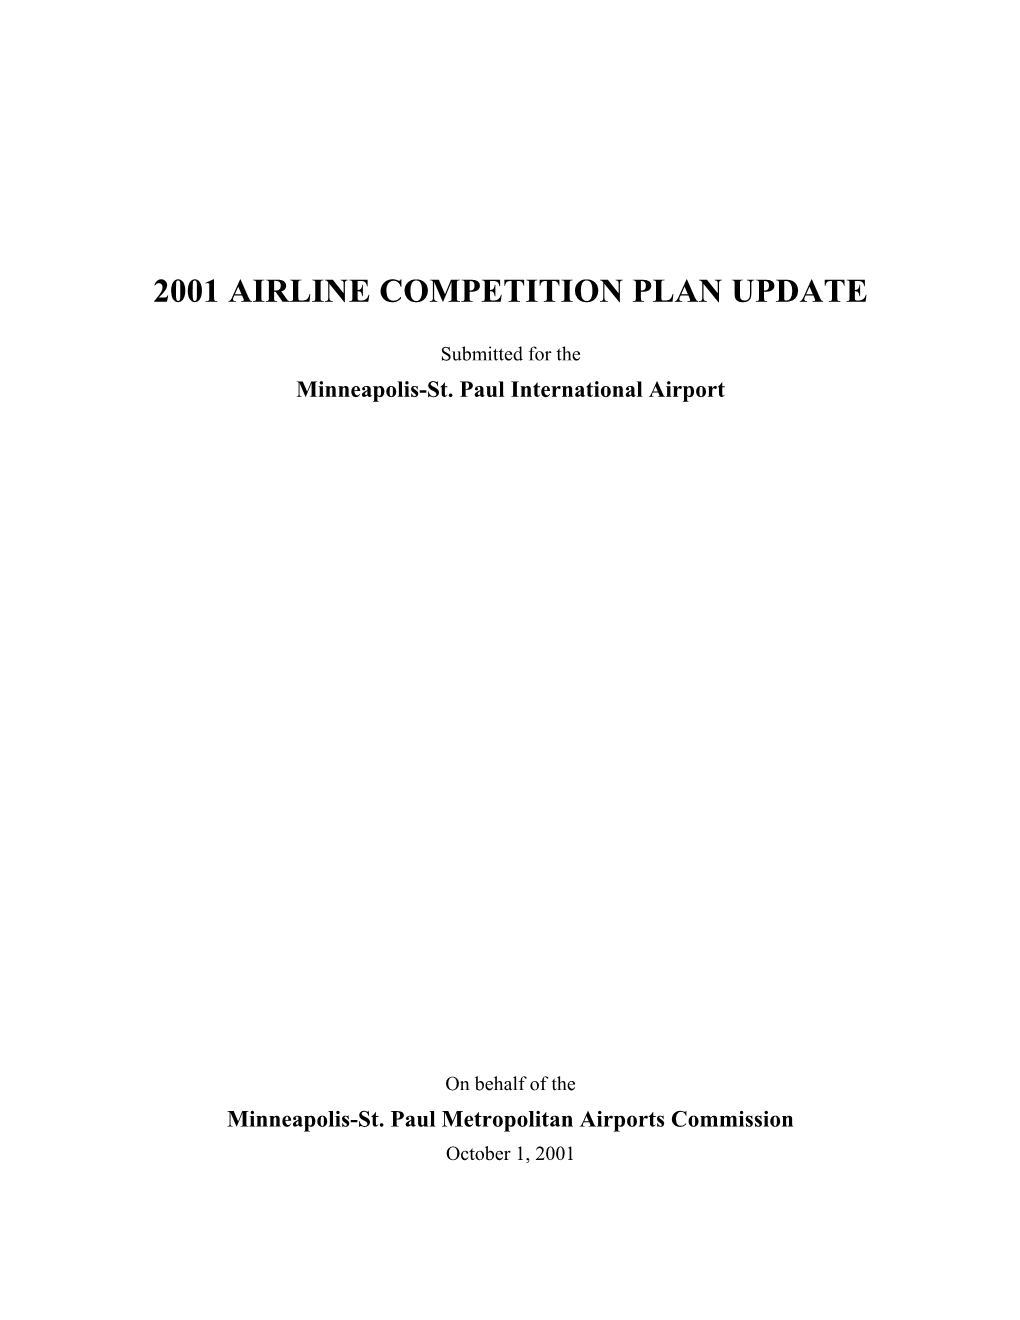 2001 Airline Competition Plan Update